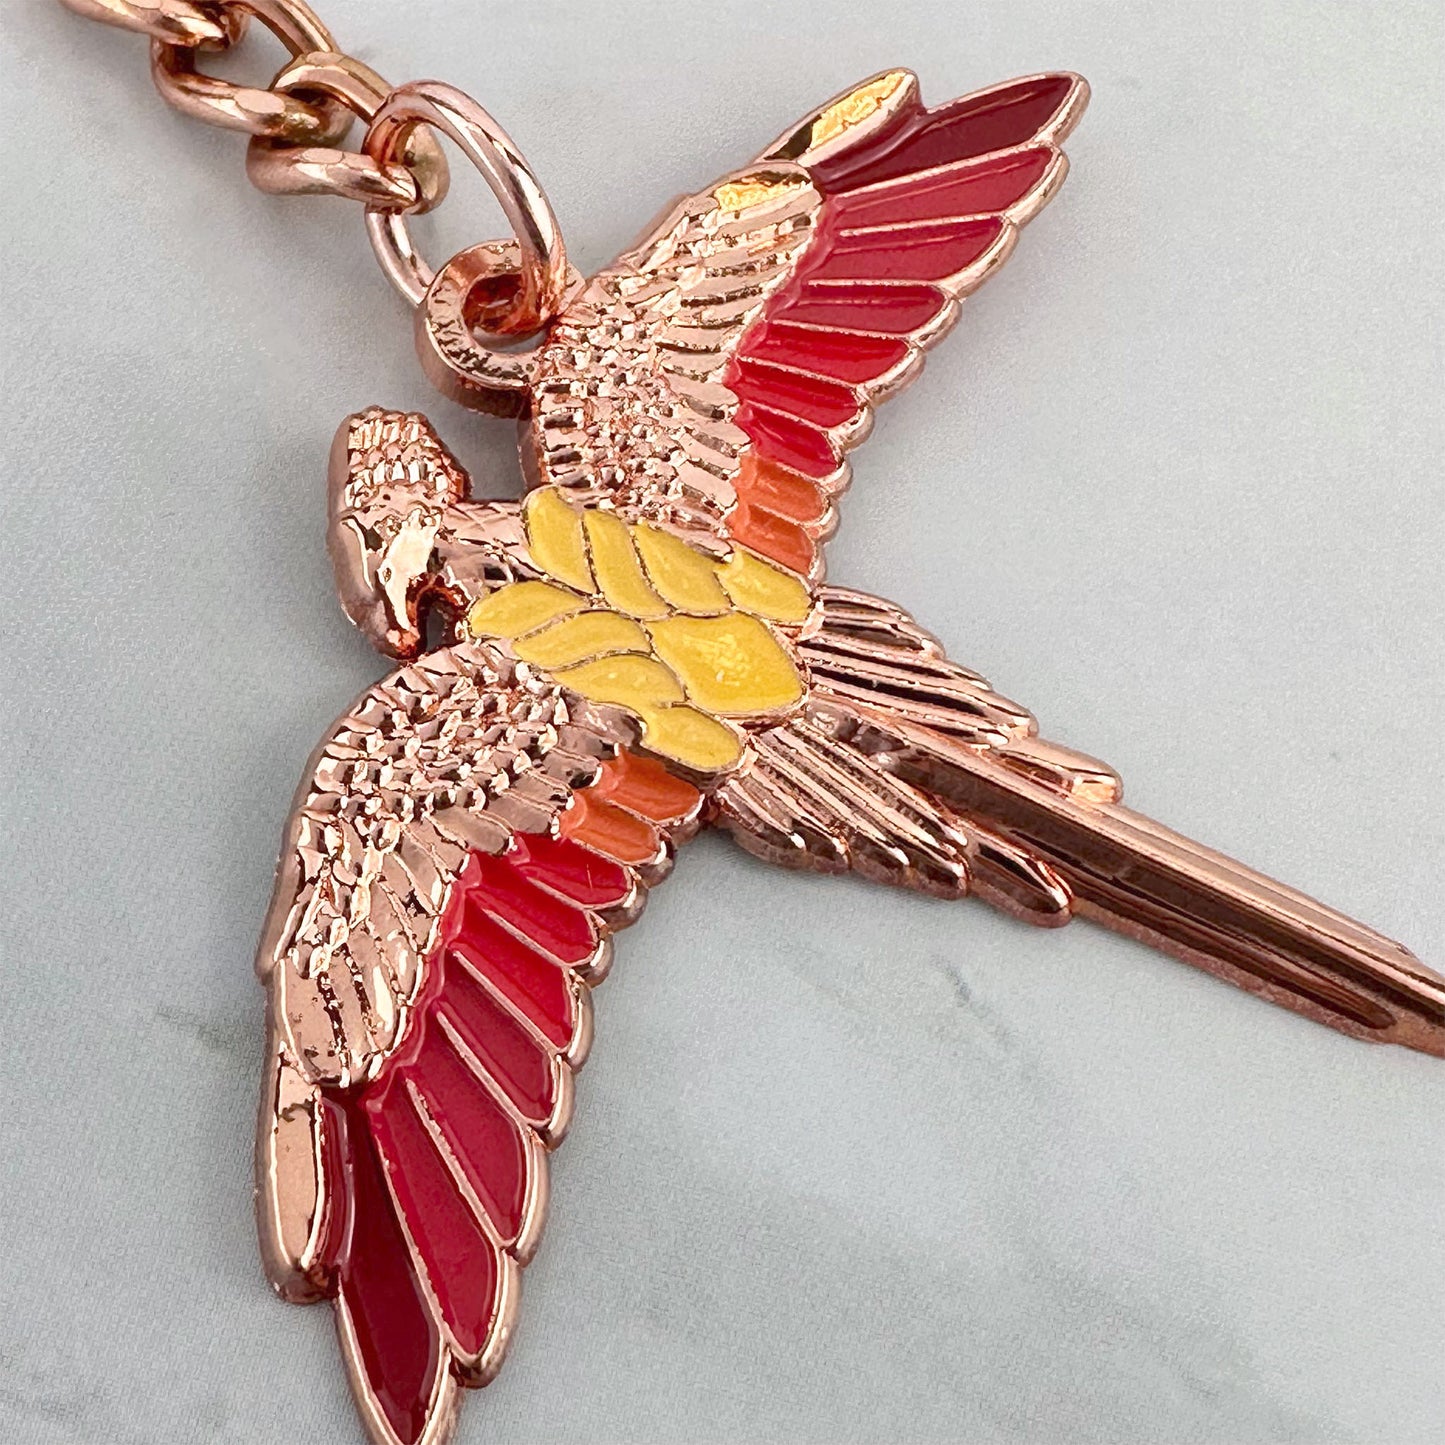 Fawkes the Phoenix Harry Potter Keychain